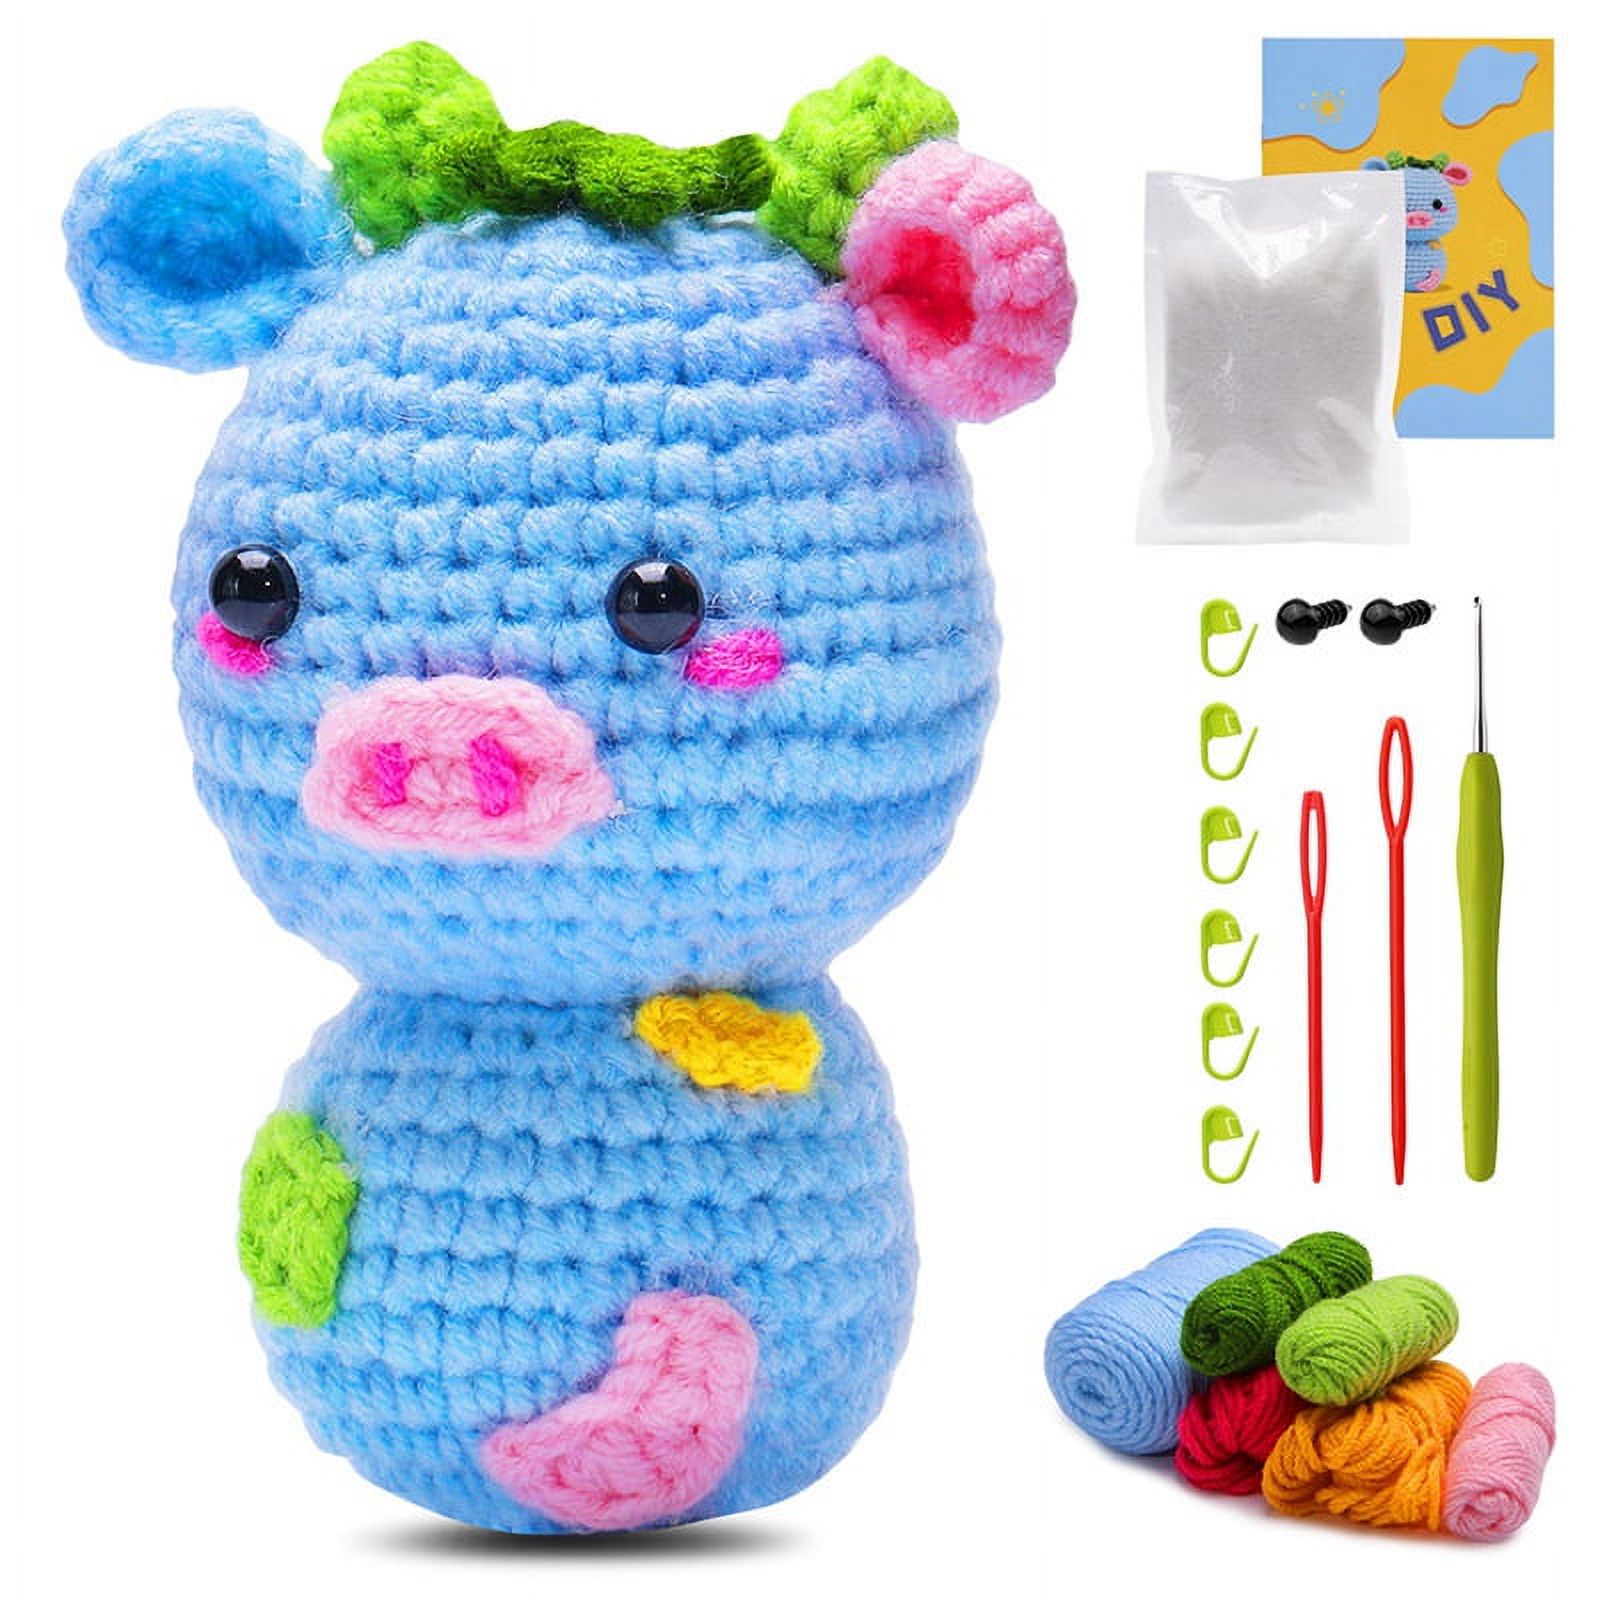 Crochet Kit for Beginners, Complete DIY Porker Animals for Adults and Kids  